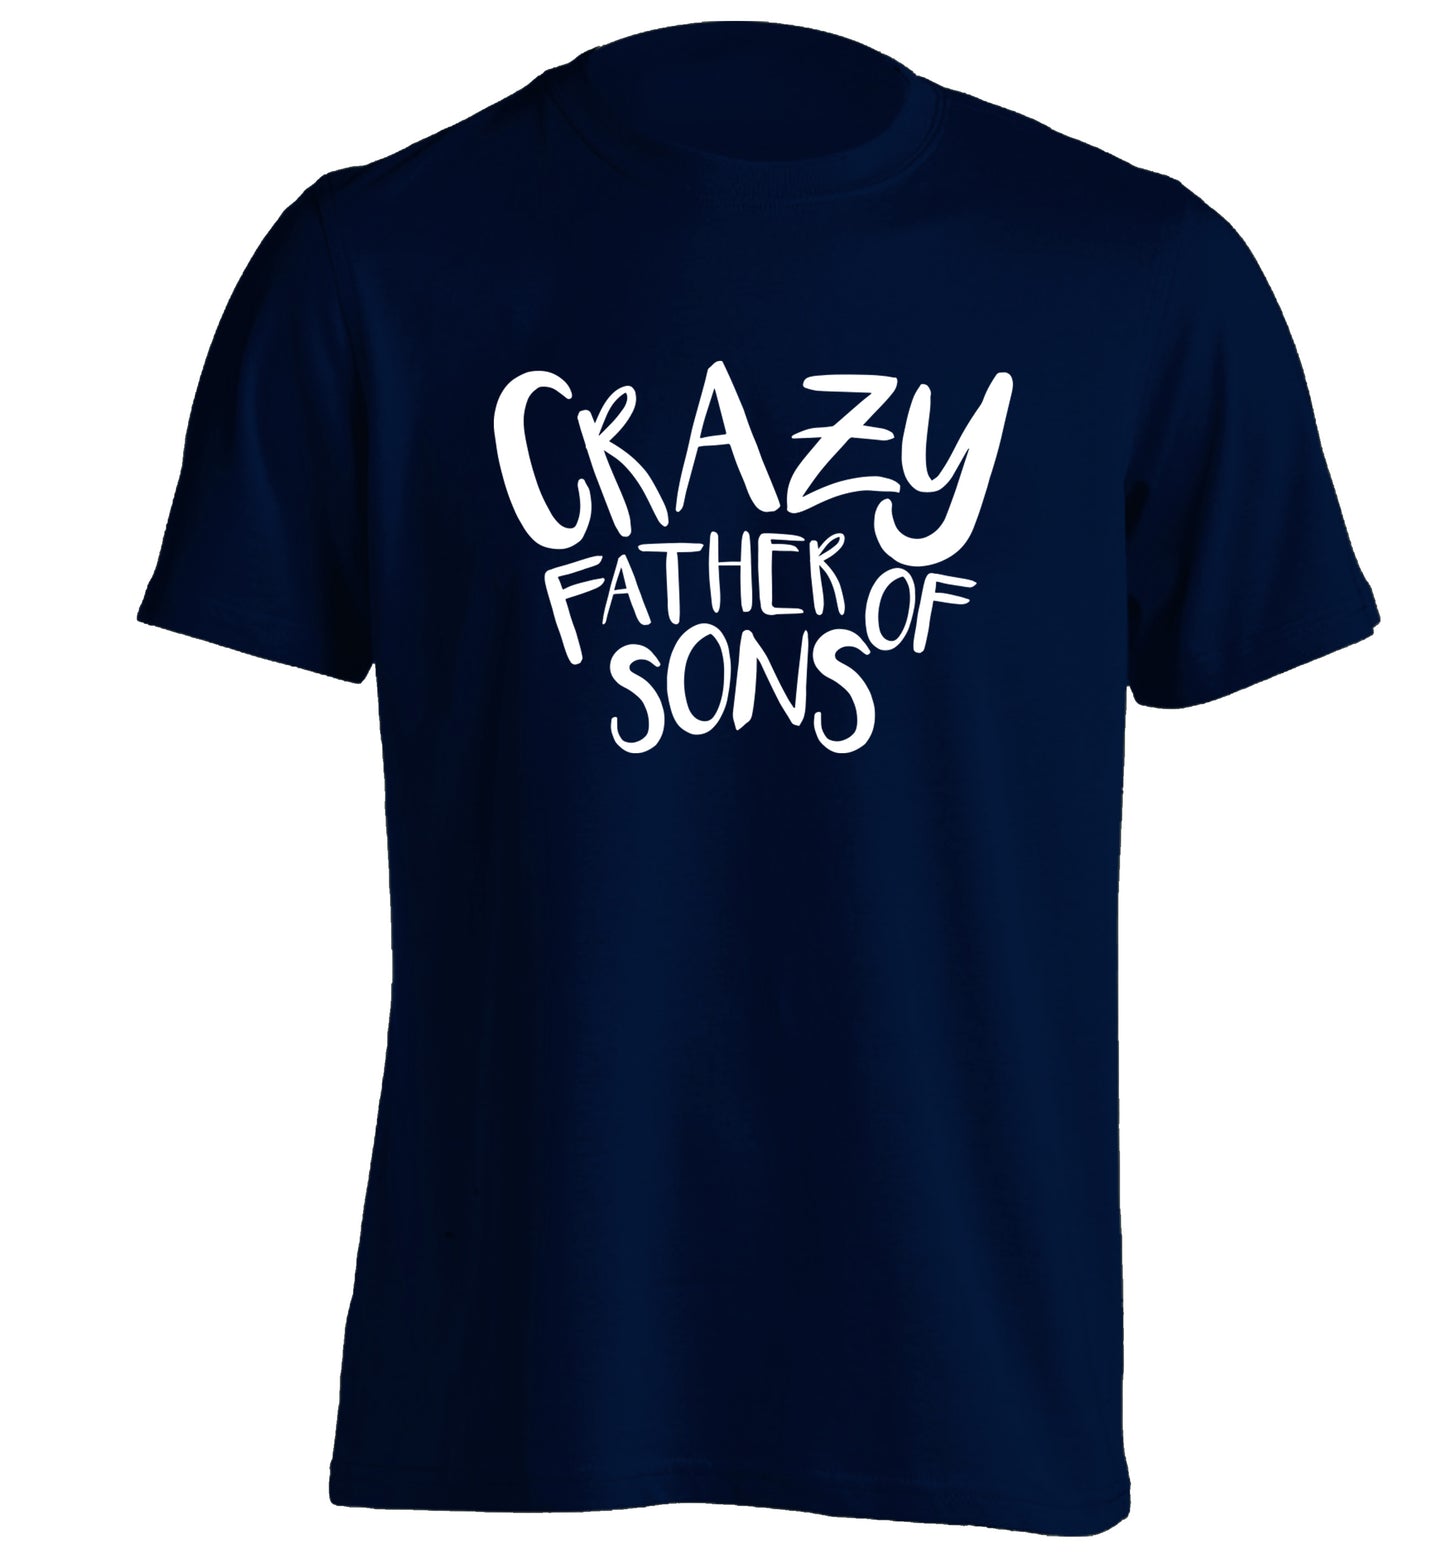 Crazy father of sons adults unisex navy Tshirt 2XL